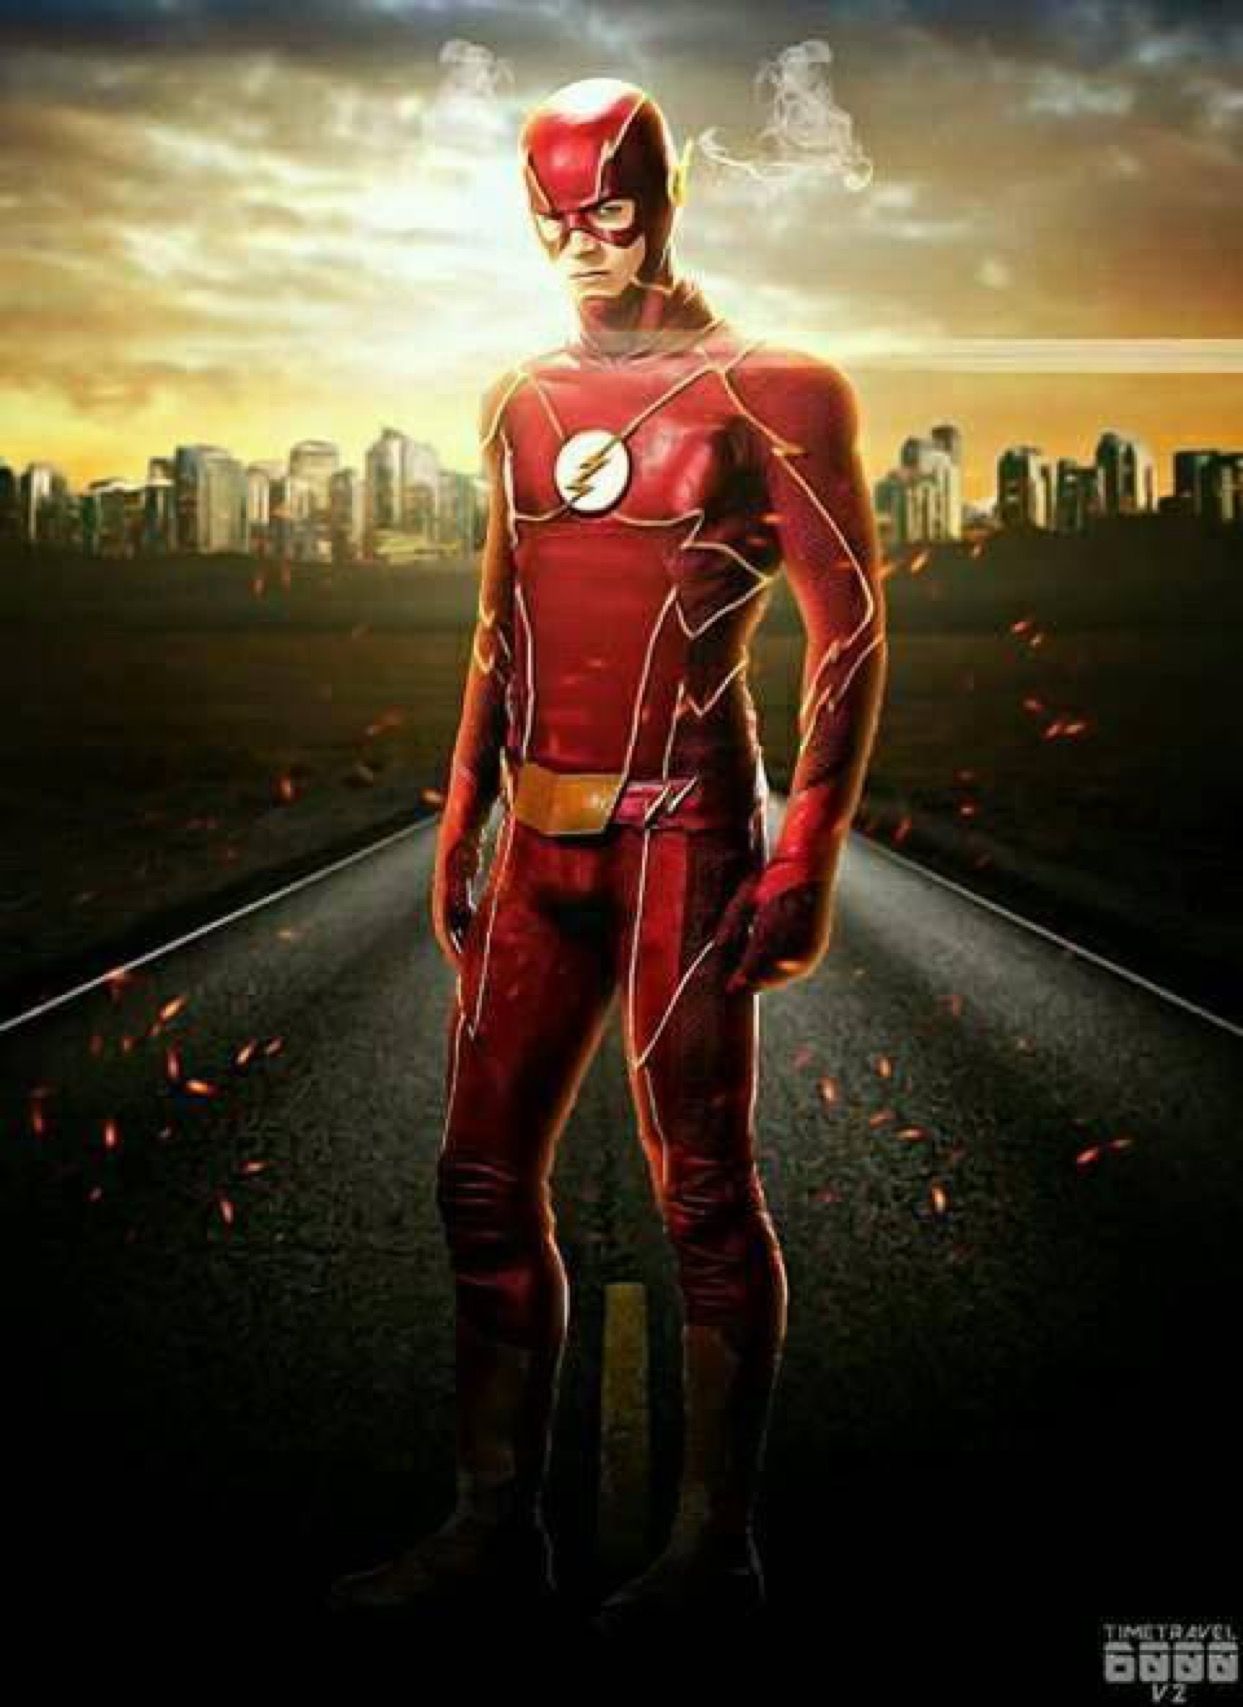 The Flash Wallpapers